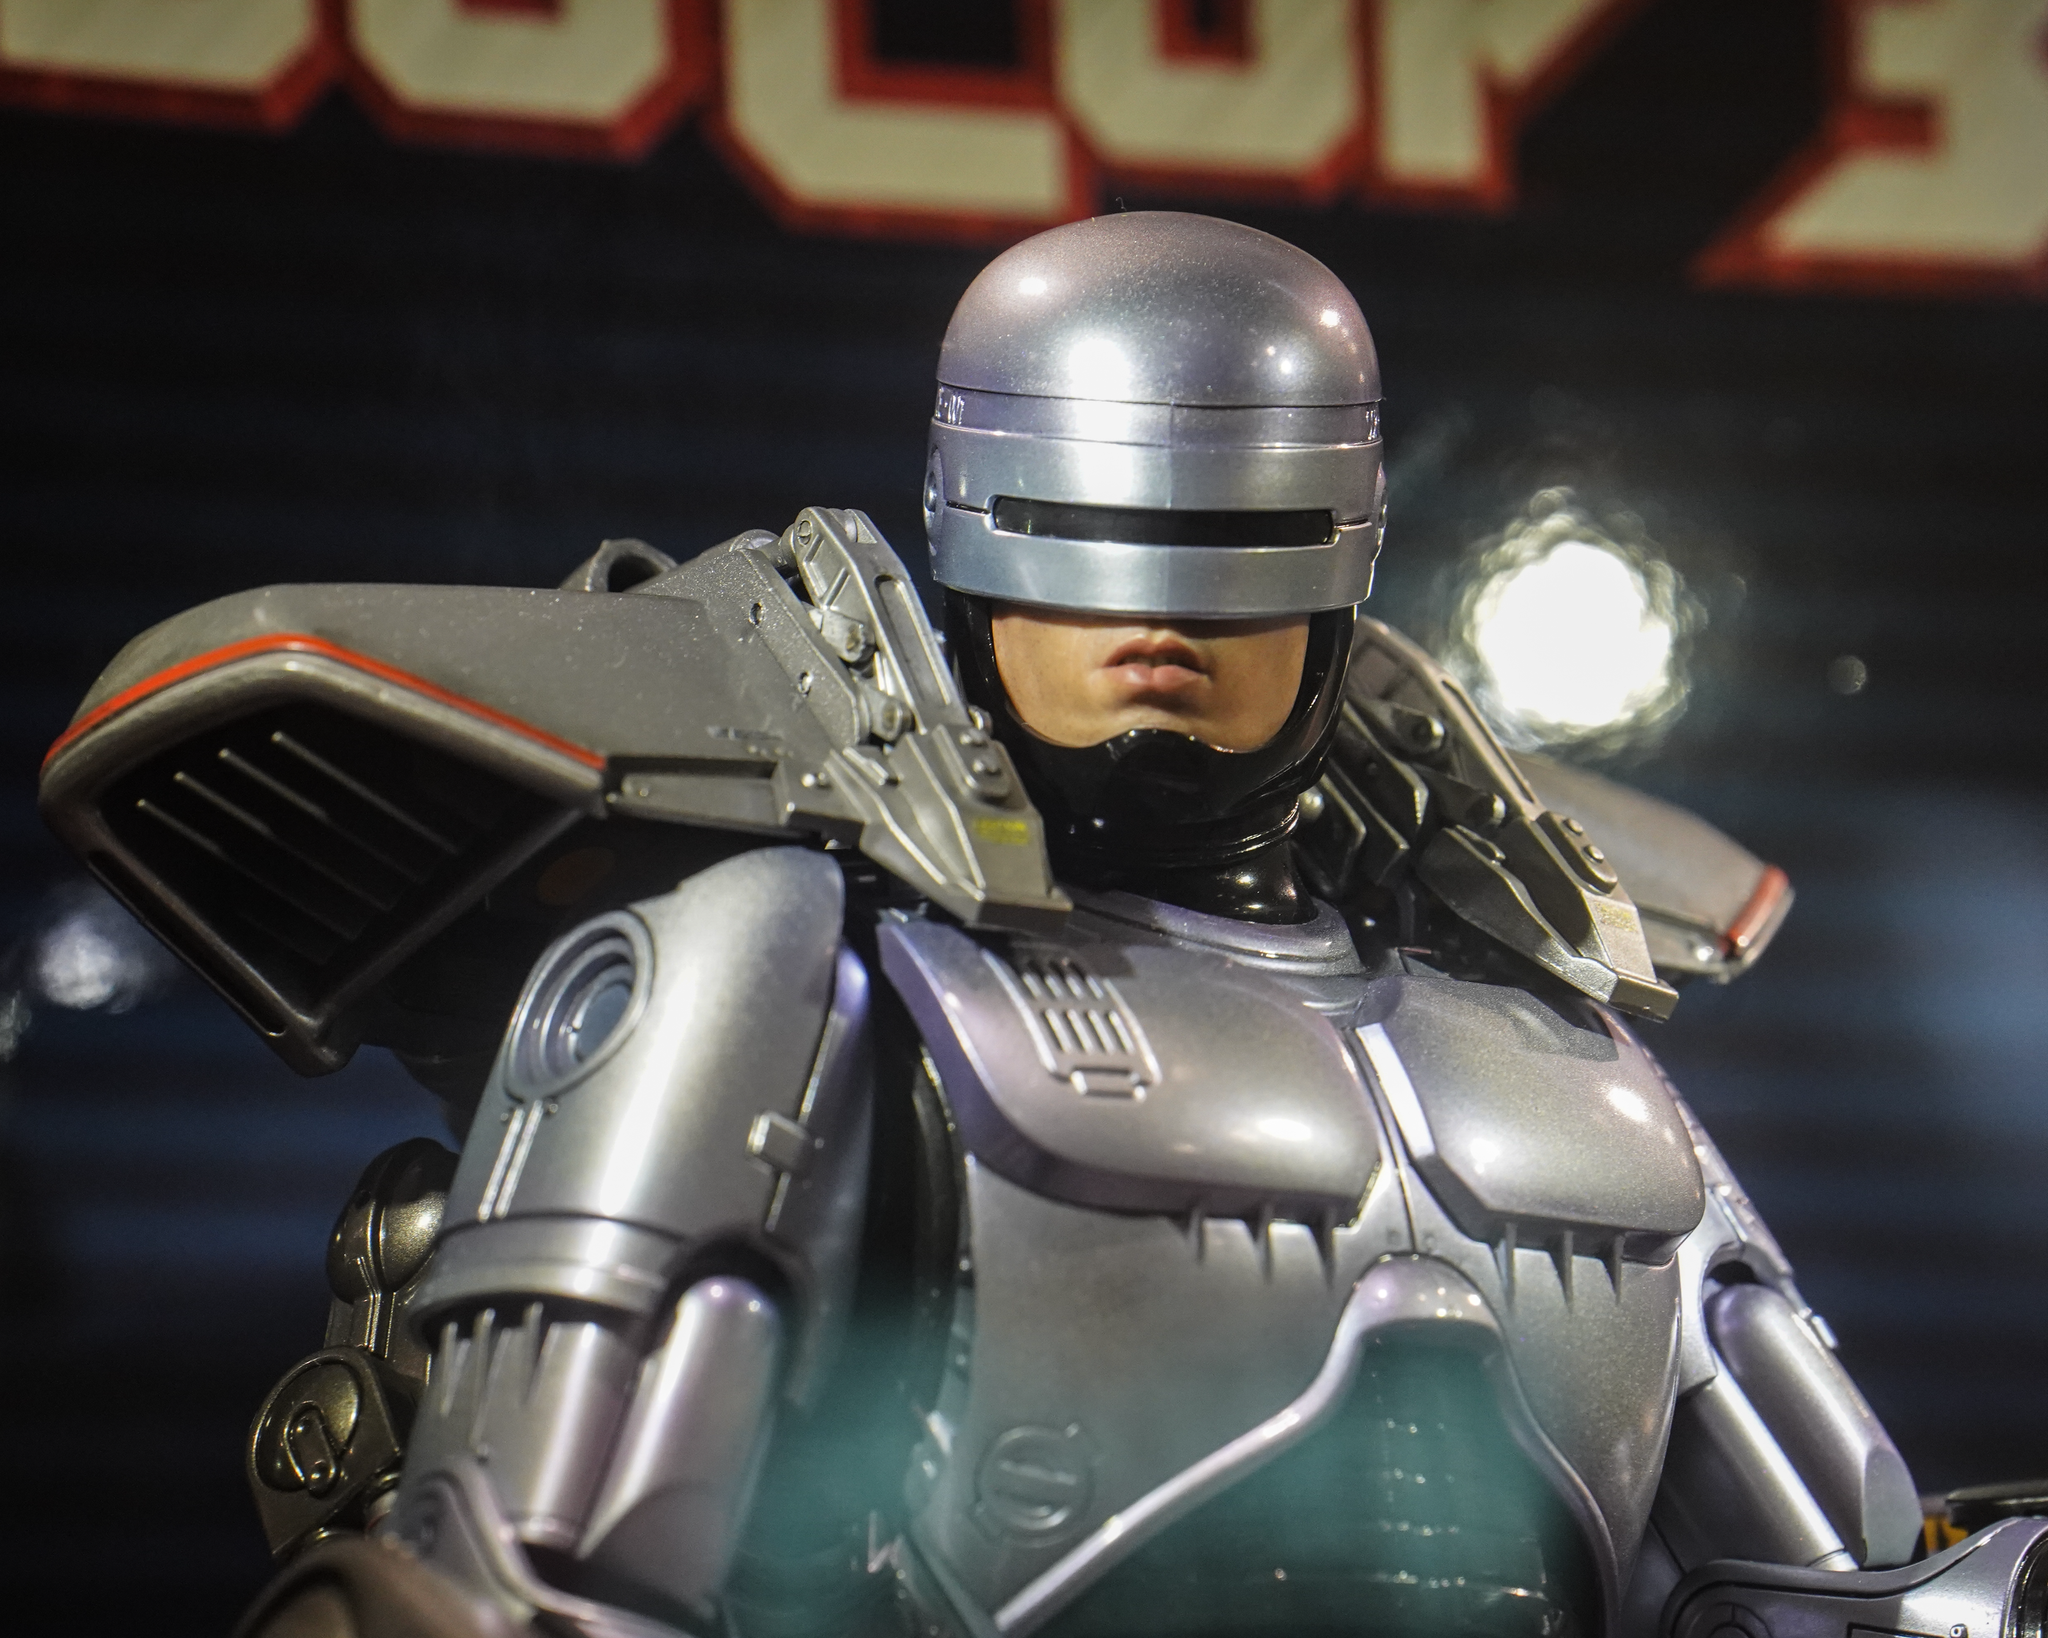 Hot Toys MMS669D49 RoboCop 3 Collectible Action Figurine 1/6